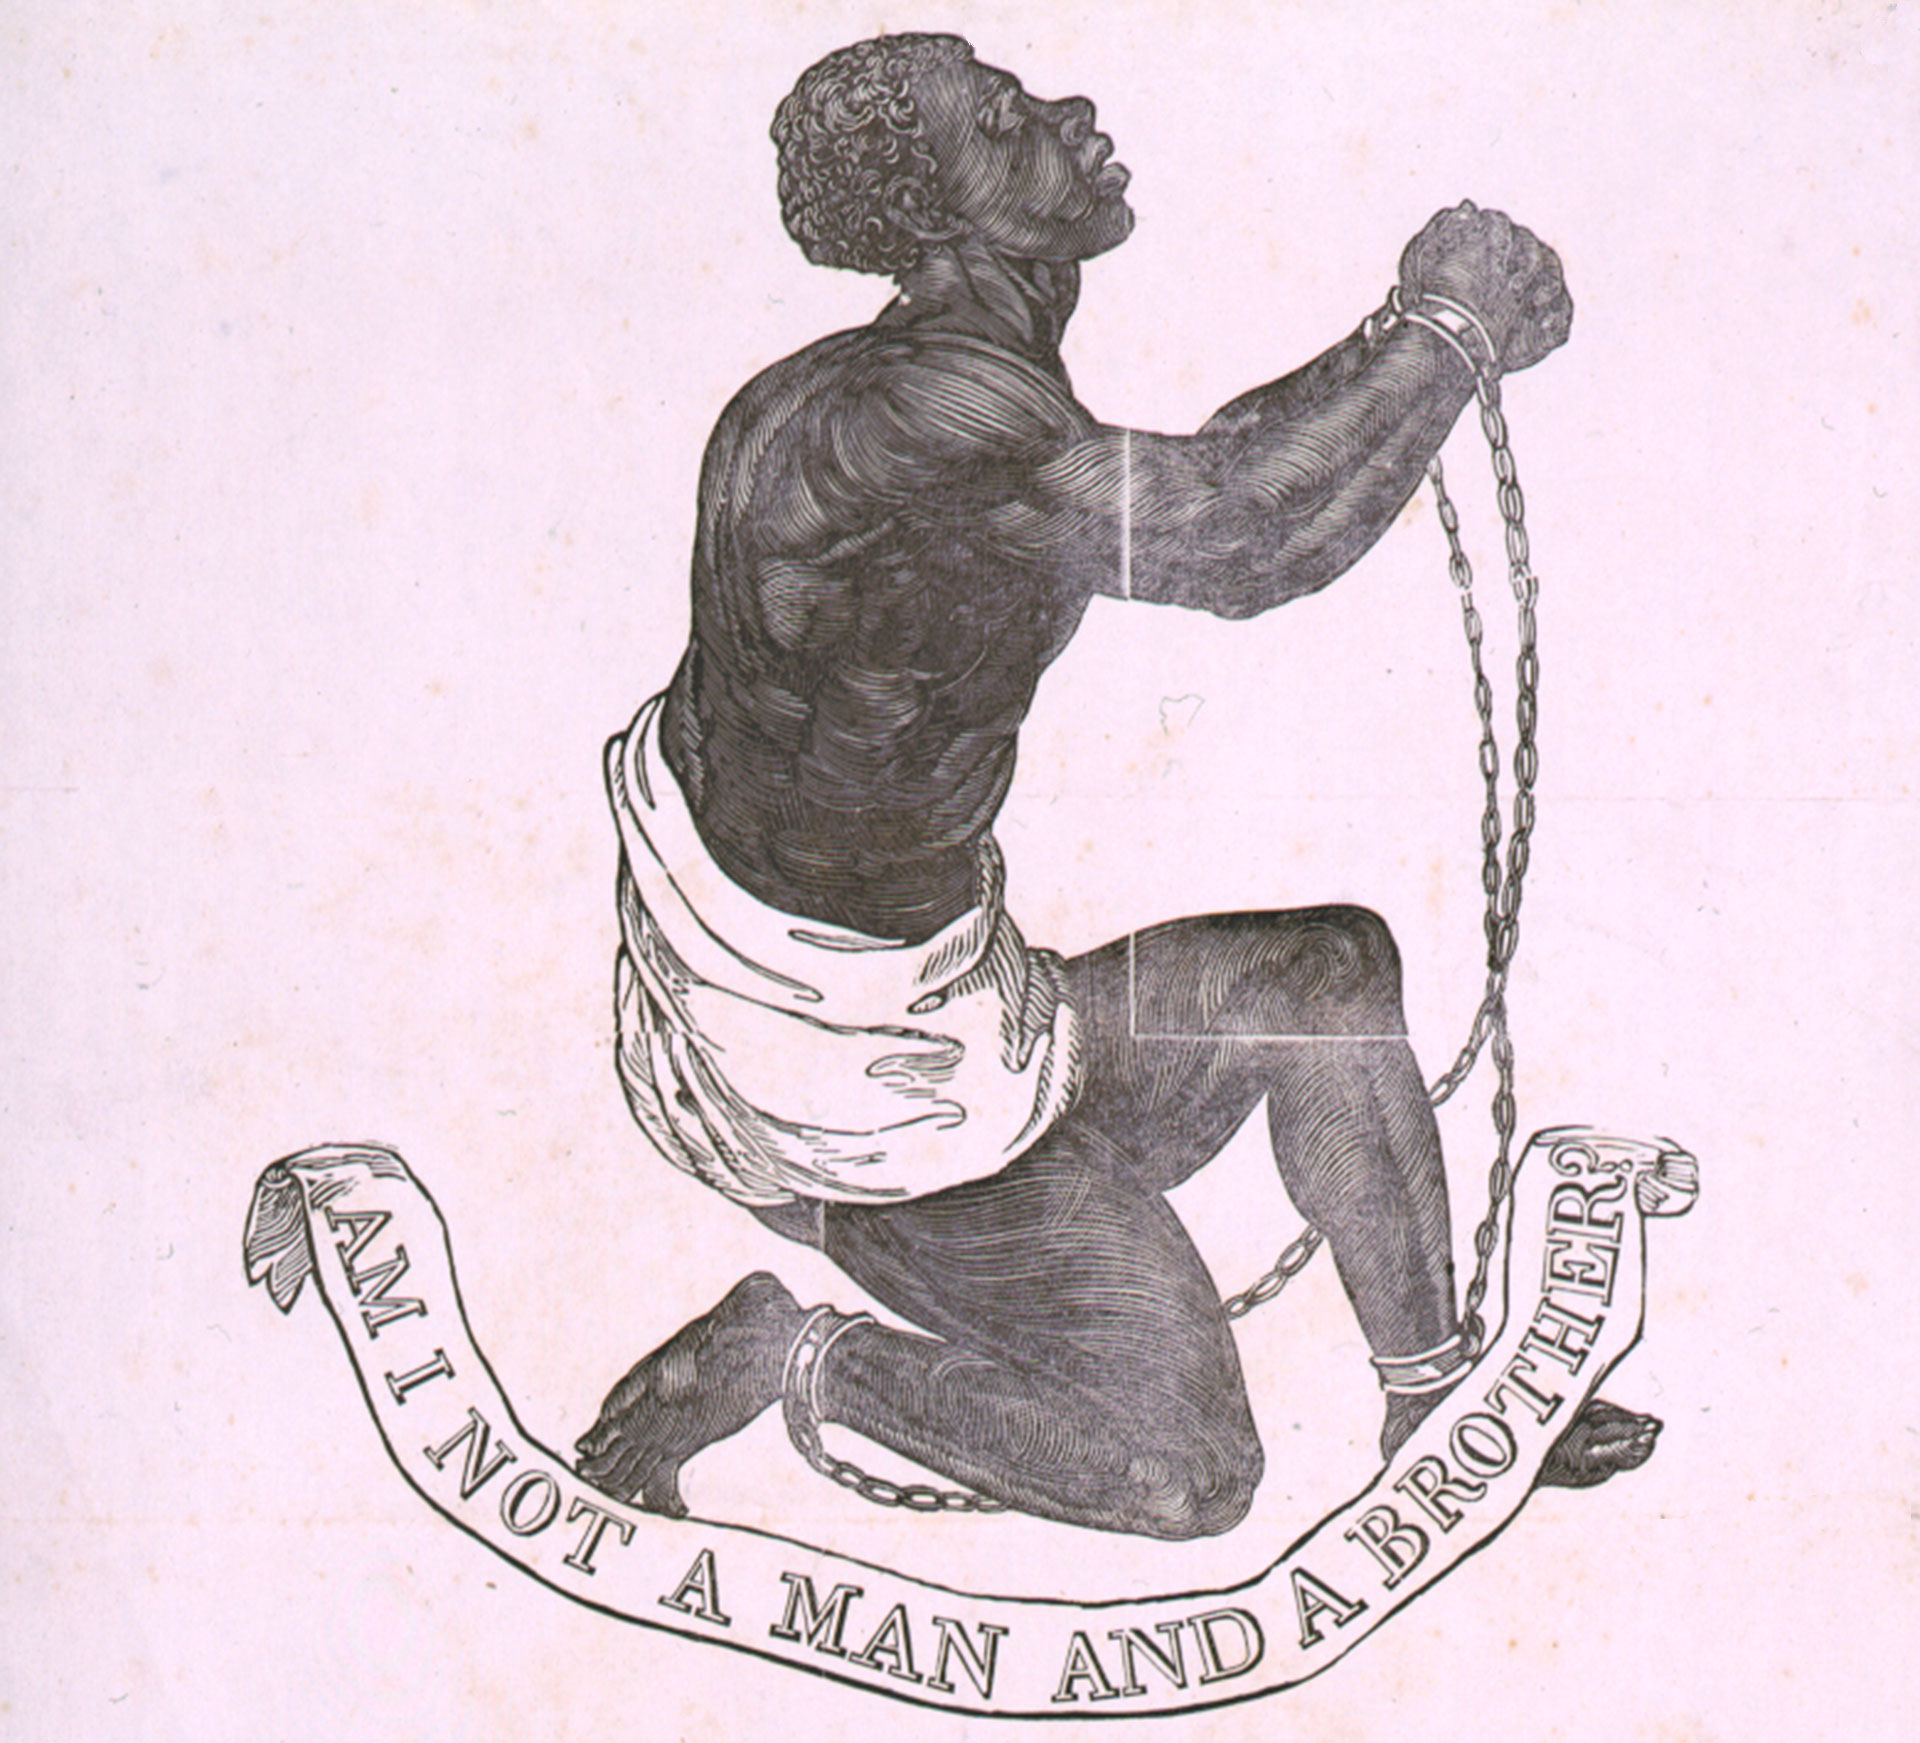 Society for the Abolition of Slavery emblem and Whittier poem